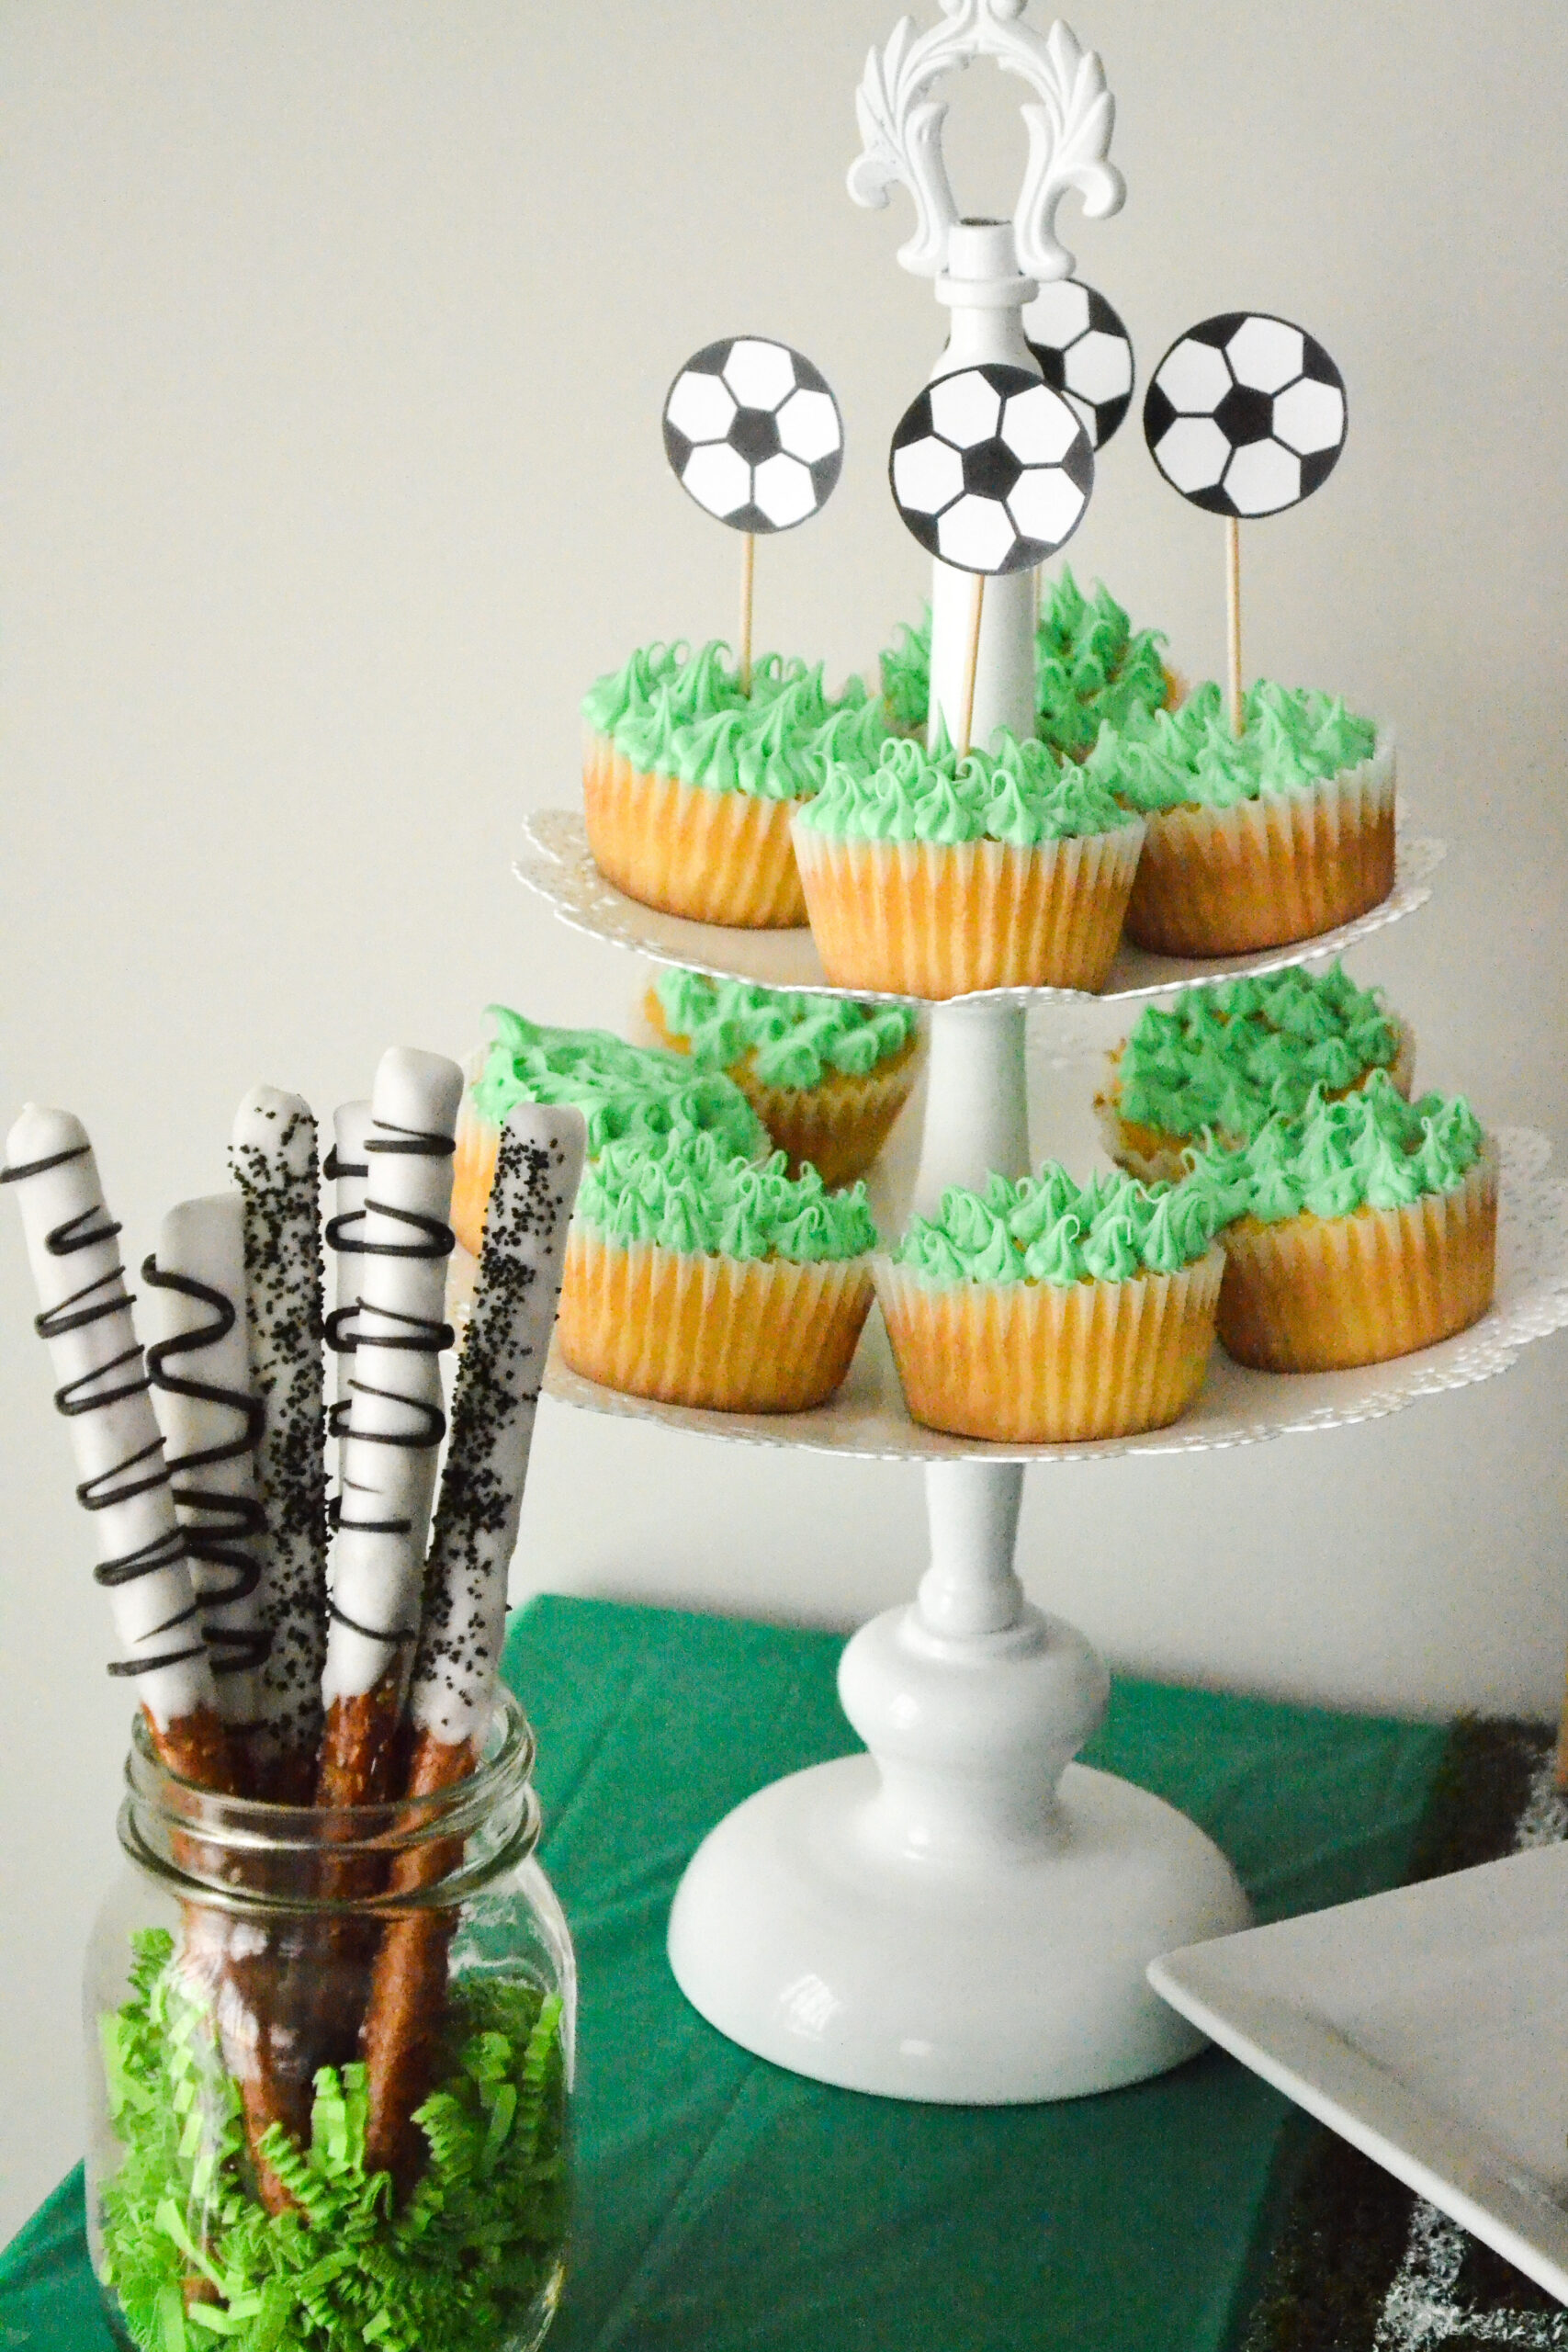 How to Plan a "Goal Worthy" Soccer Themed Party